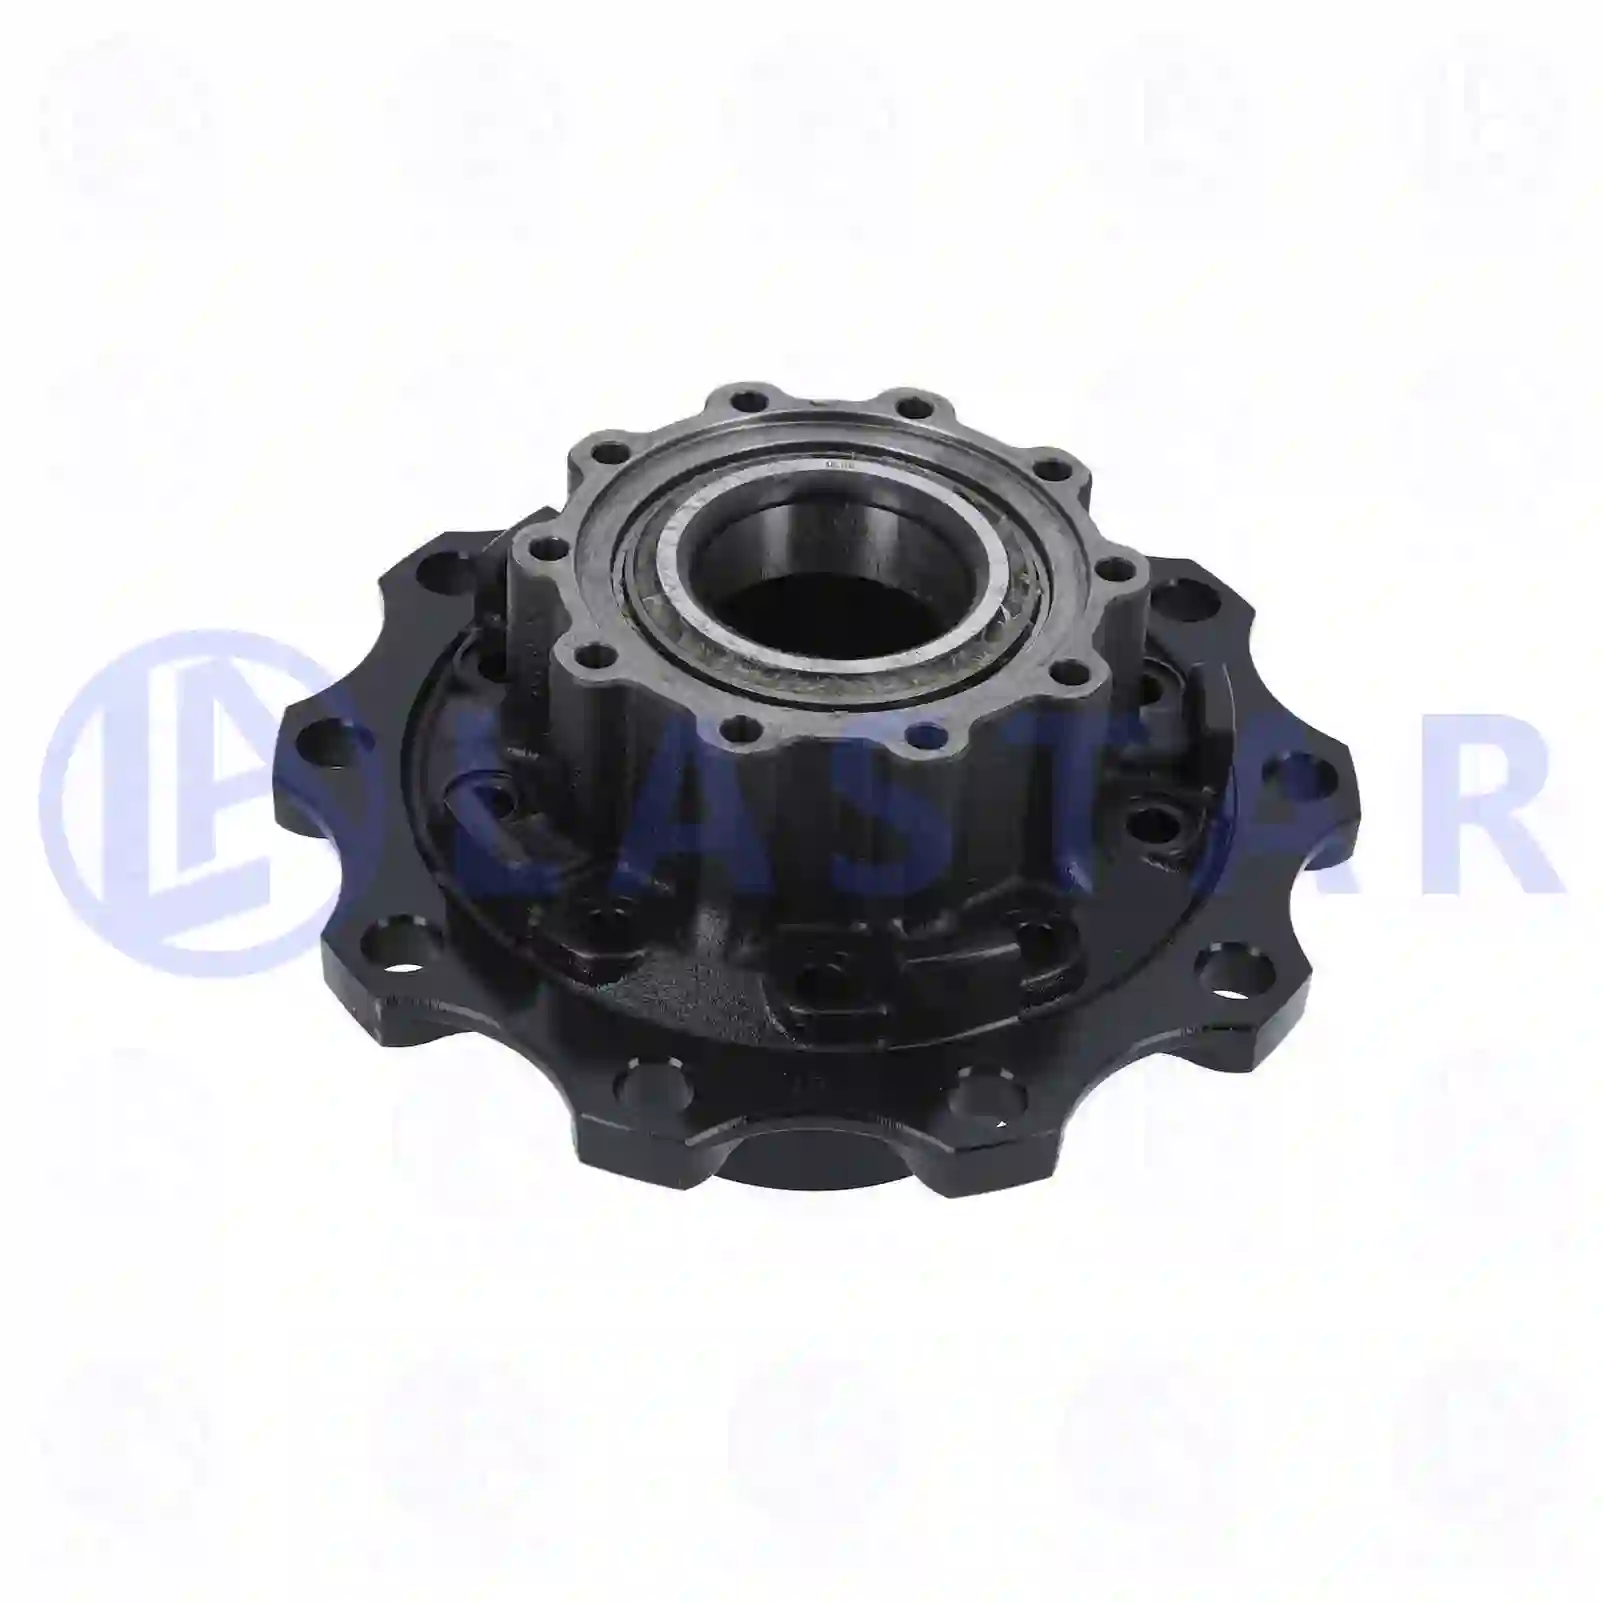 Wheel hub, with bearing, without ABS ring, 77726944, 1800283S, 2290542S, ZG30215-0008, , , , ||  77726944 Lastar Spare Part | Truck Spare Parts, Auotomotive Spare Parts Wheel hub, with bearing, without ABS ring, 77726944, 1800283S, 2290542S, ZG30215-0008, , , , ||  77726944 Lastar Spare Part | Truck Spare Parts, Auotomotive Spare Parts